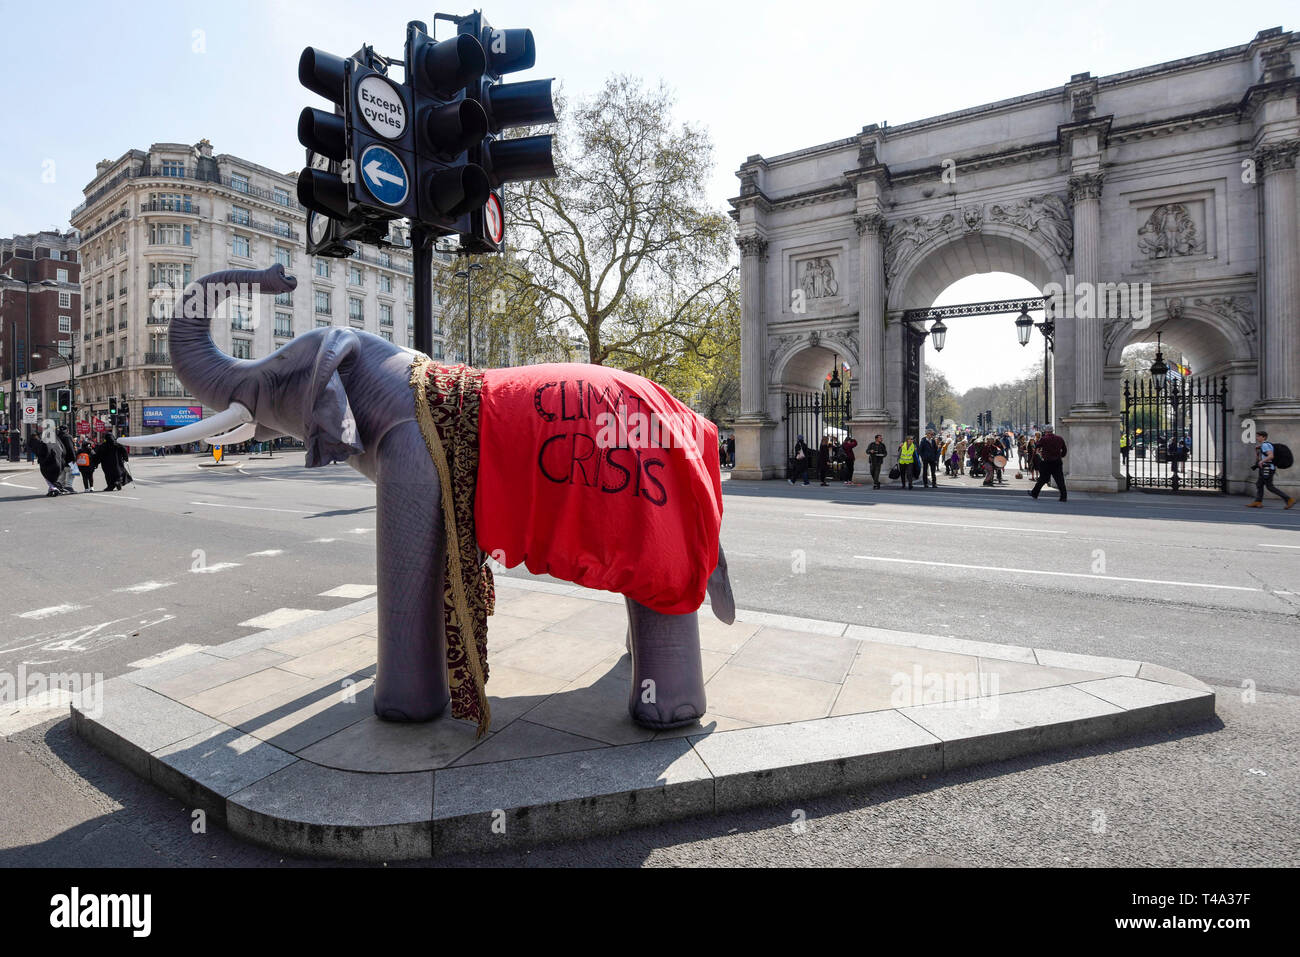 London, UK.  15 April 2019.  An inflatable elephant by Marble Arch during 'London: International Rebellion', a protest organised by Extinction Rebellion, demanding that governments take action against climate change.  Marble Arch, Oxford Circus, Piccadilly Circus, Waterloo Bridge and Parliament Square have been blocked by activists.  According to the organiser, similar protests are taking place in 80 other cities around the world.   Credit: Stephen Chung / Alamy Live News Stock Photo